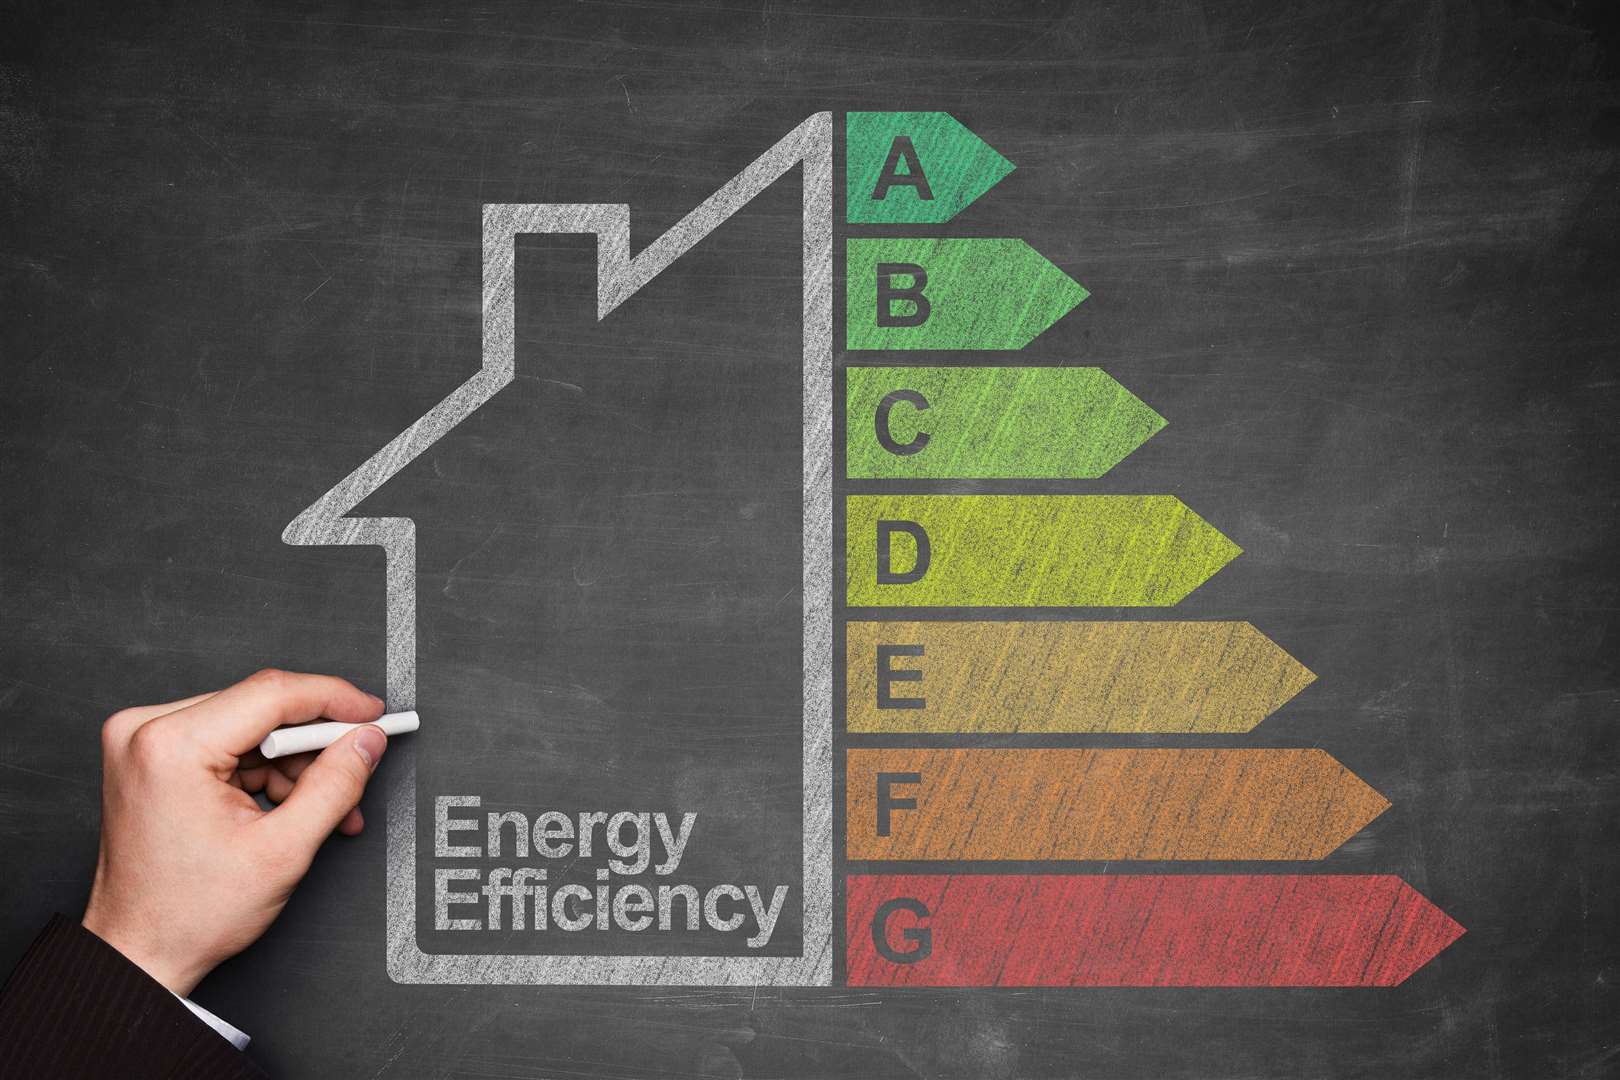 Energy Performance Certificate (EPC) band C is to be a legislative requirement by 2033.